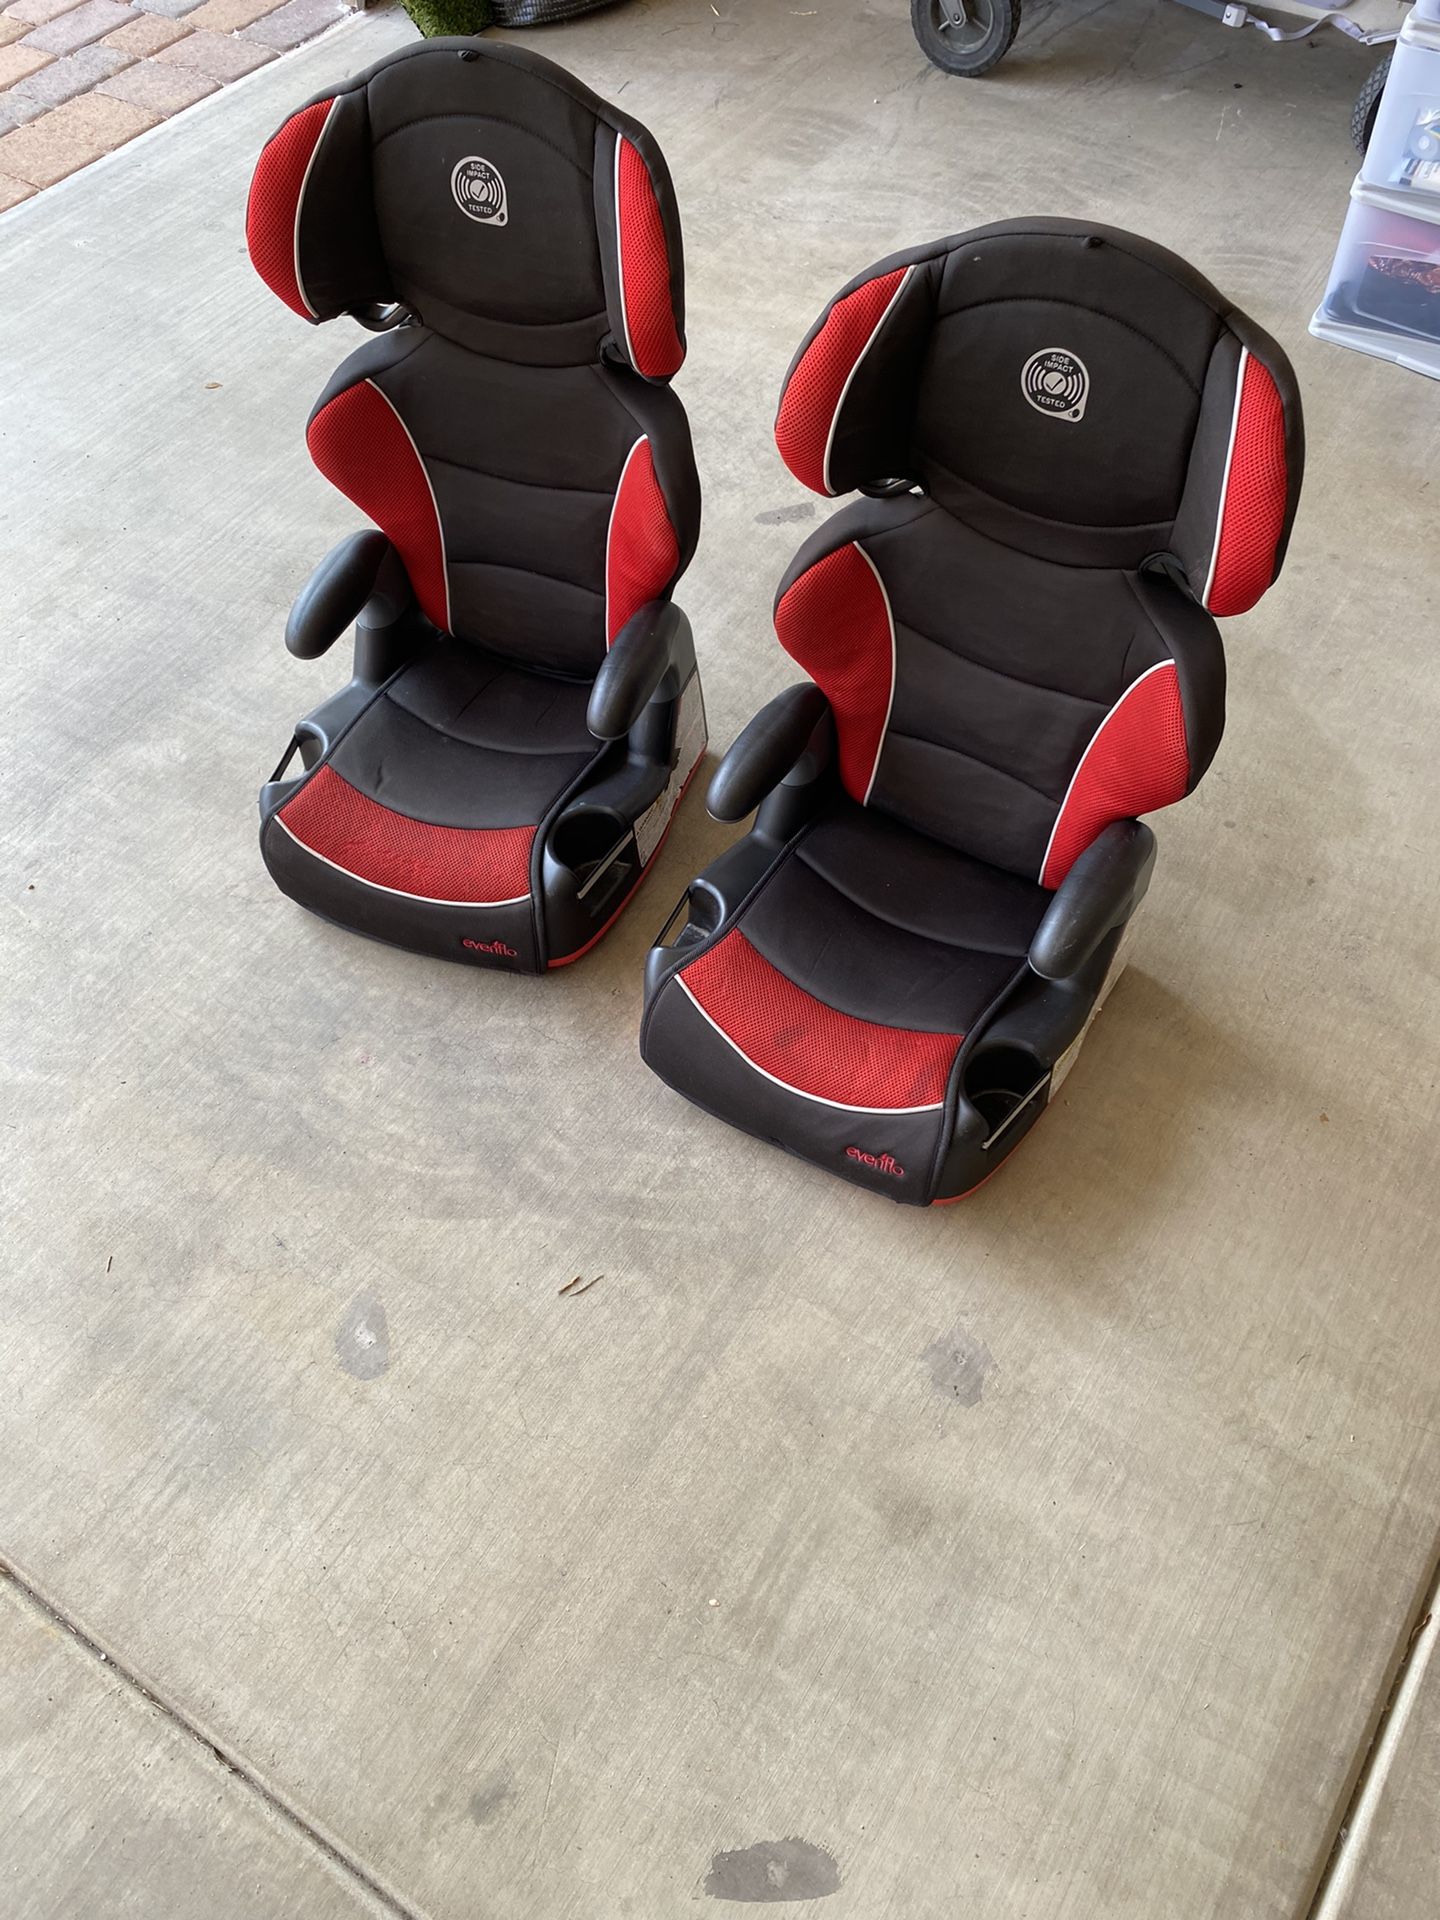 Two Car seat boosters